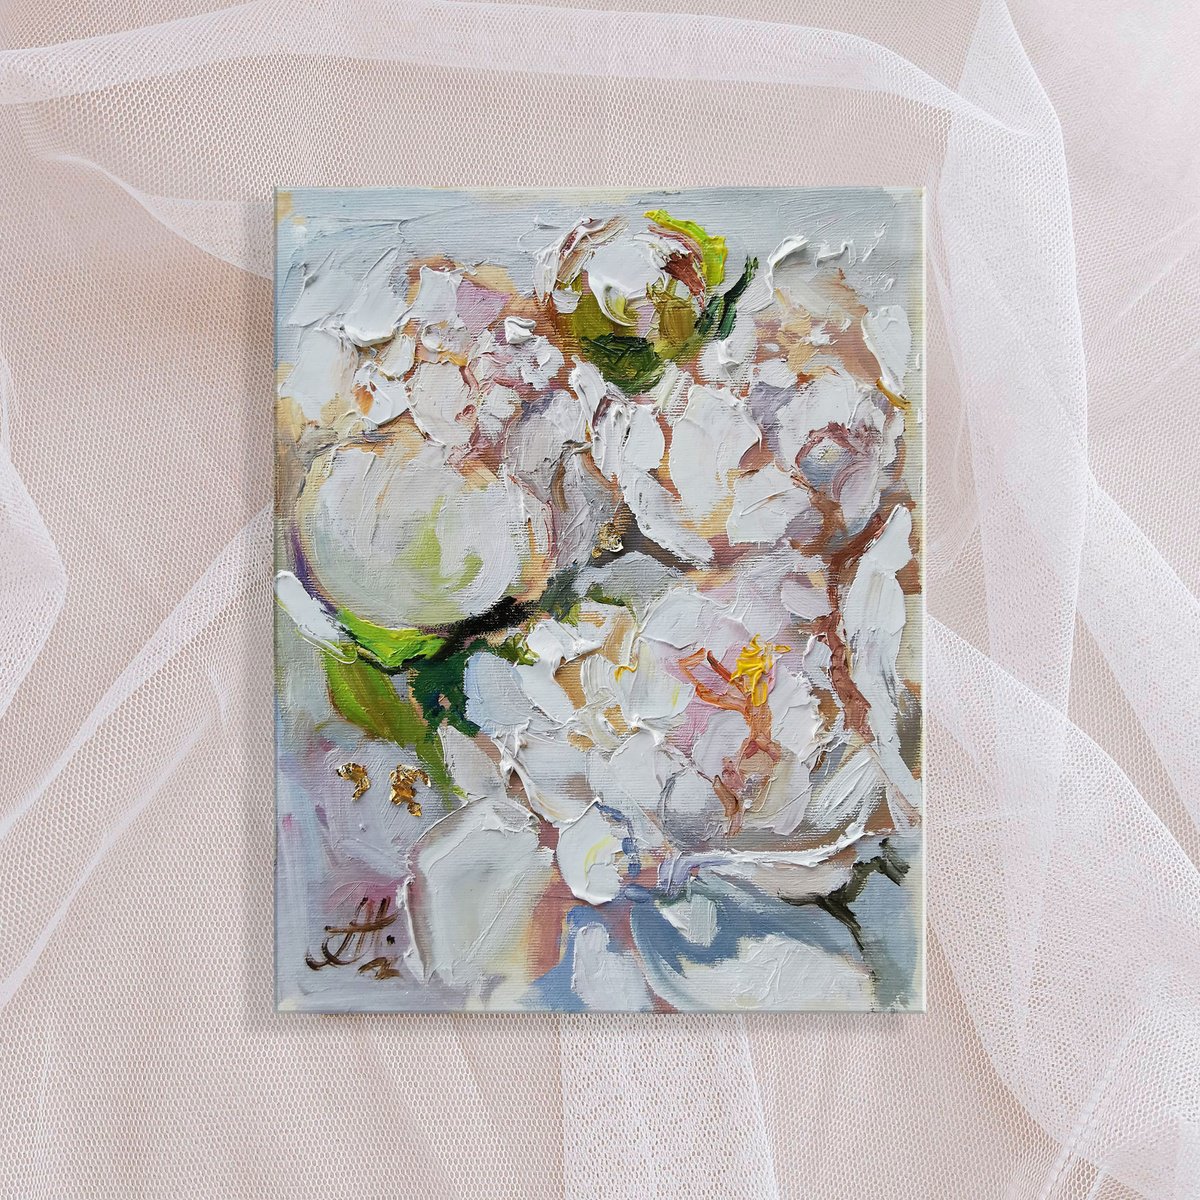 Miniature Oil Painting of Exquisite White Peonies with Textured Brushstrokes by Annet Loginova